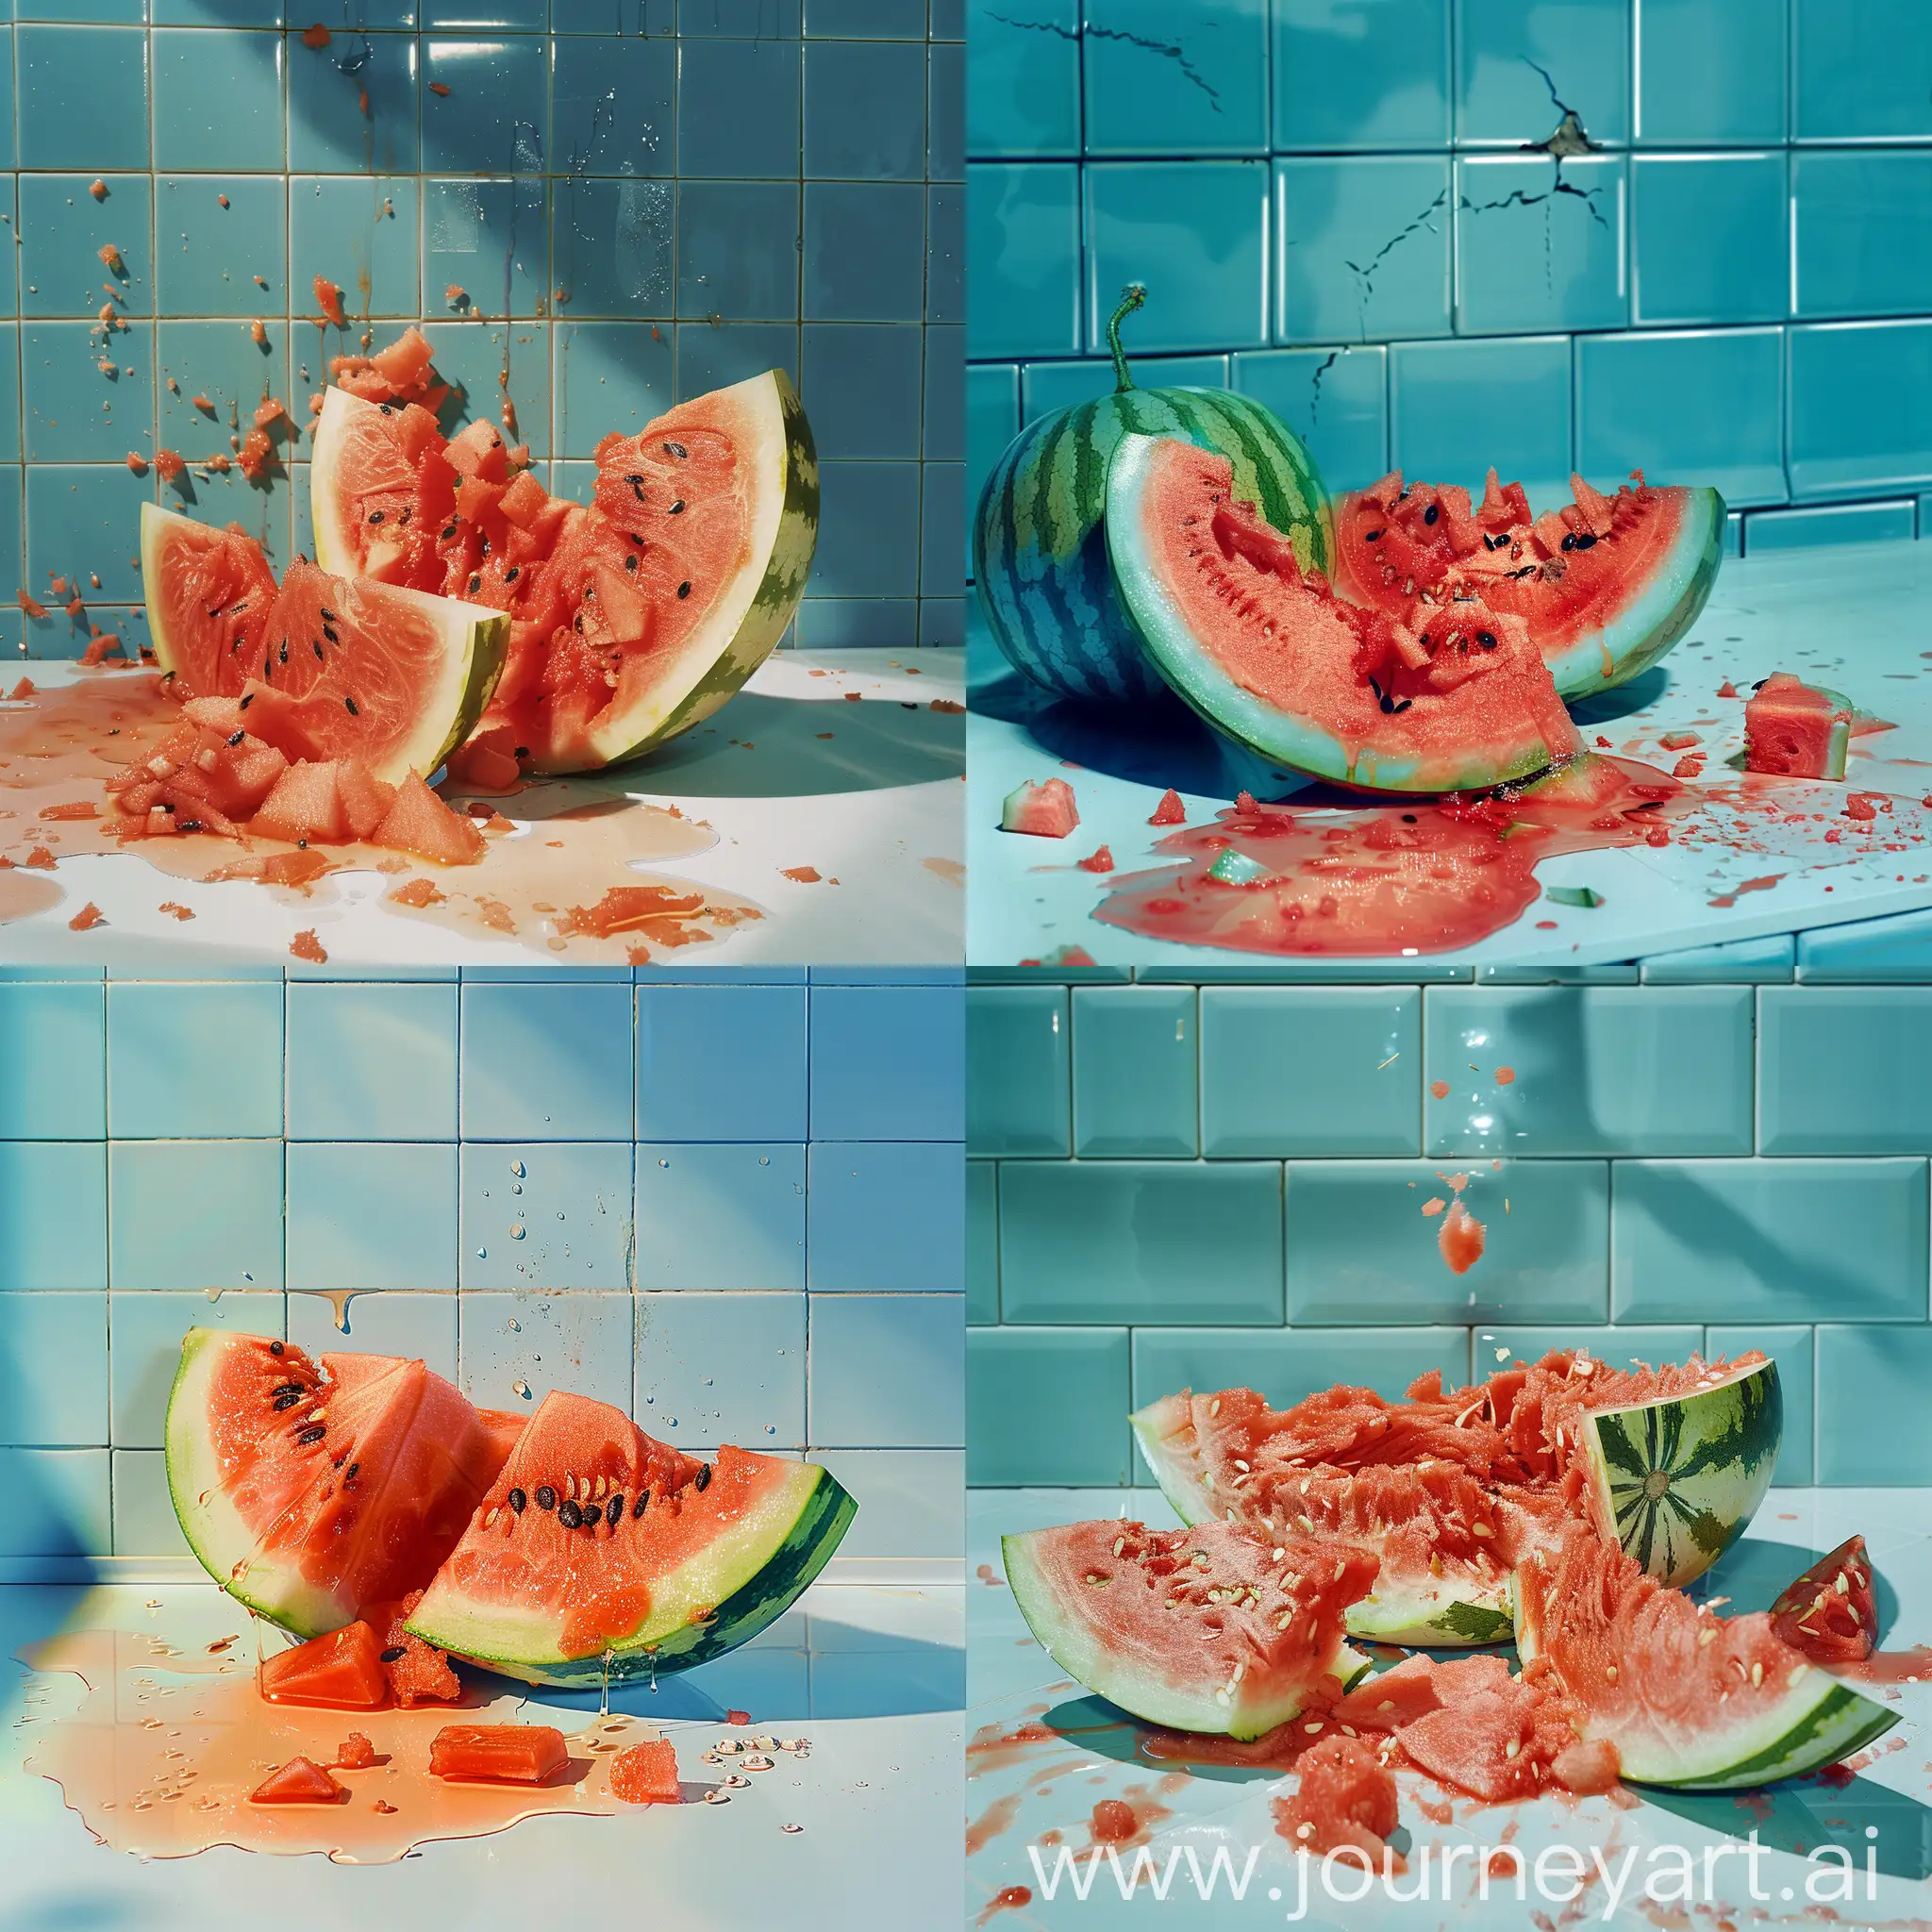 Broken-Watermelon-with-Pulp-and-Juice-on-White-Table-Against-Blue-Tiles